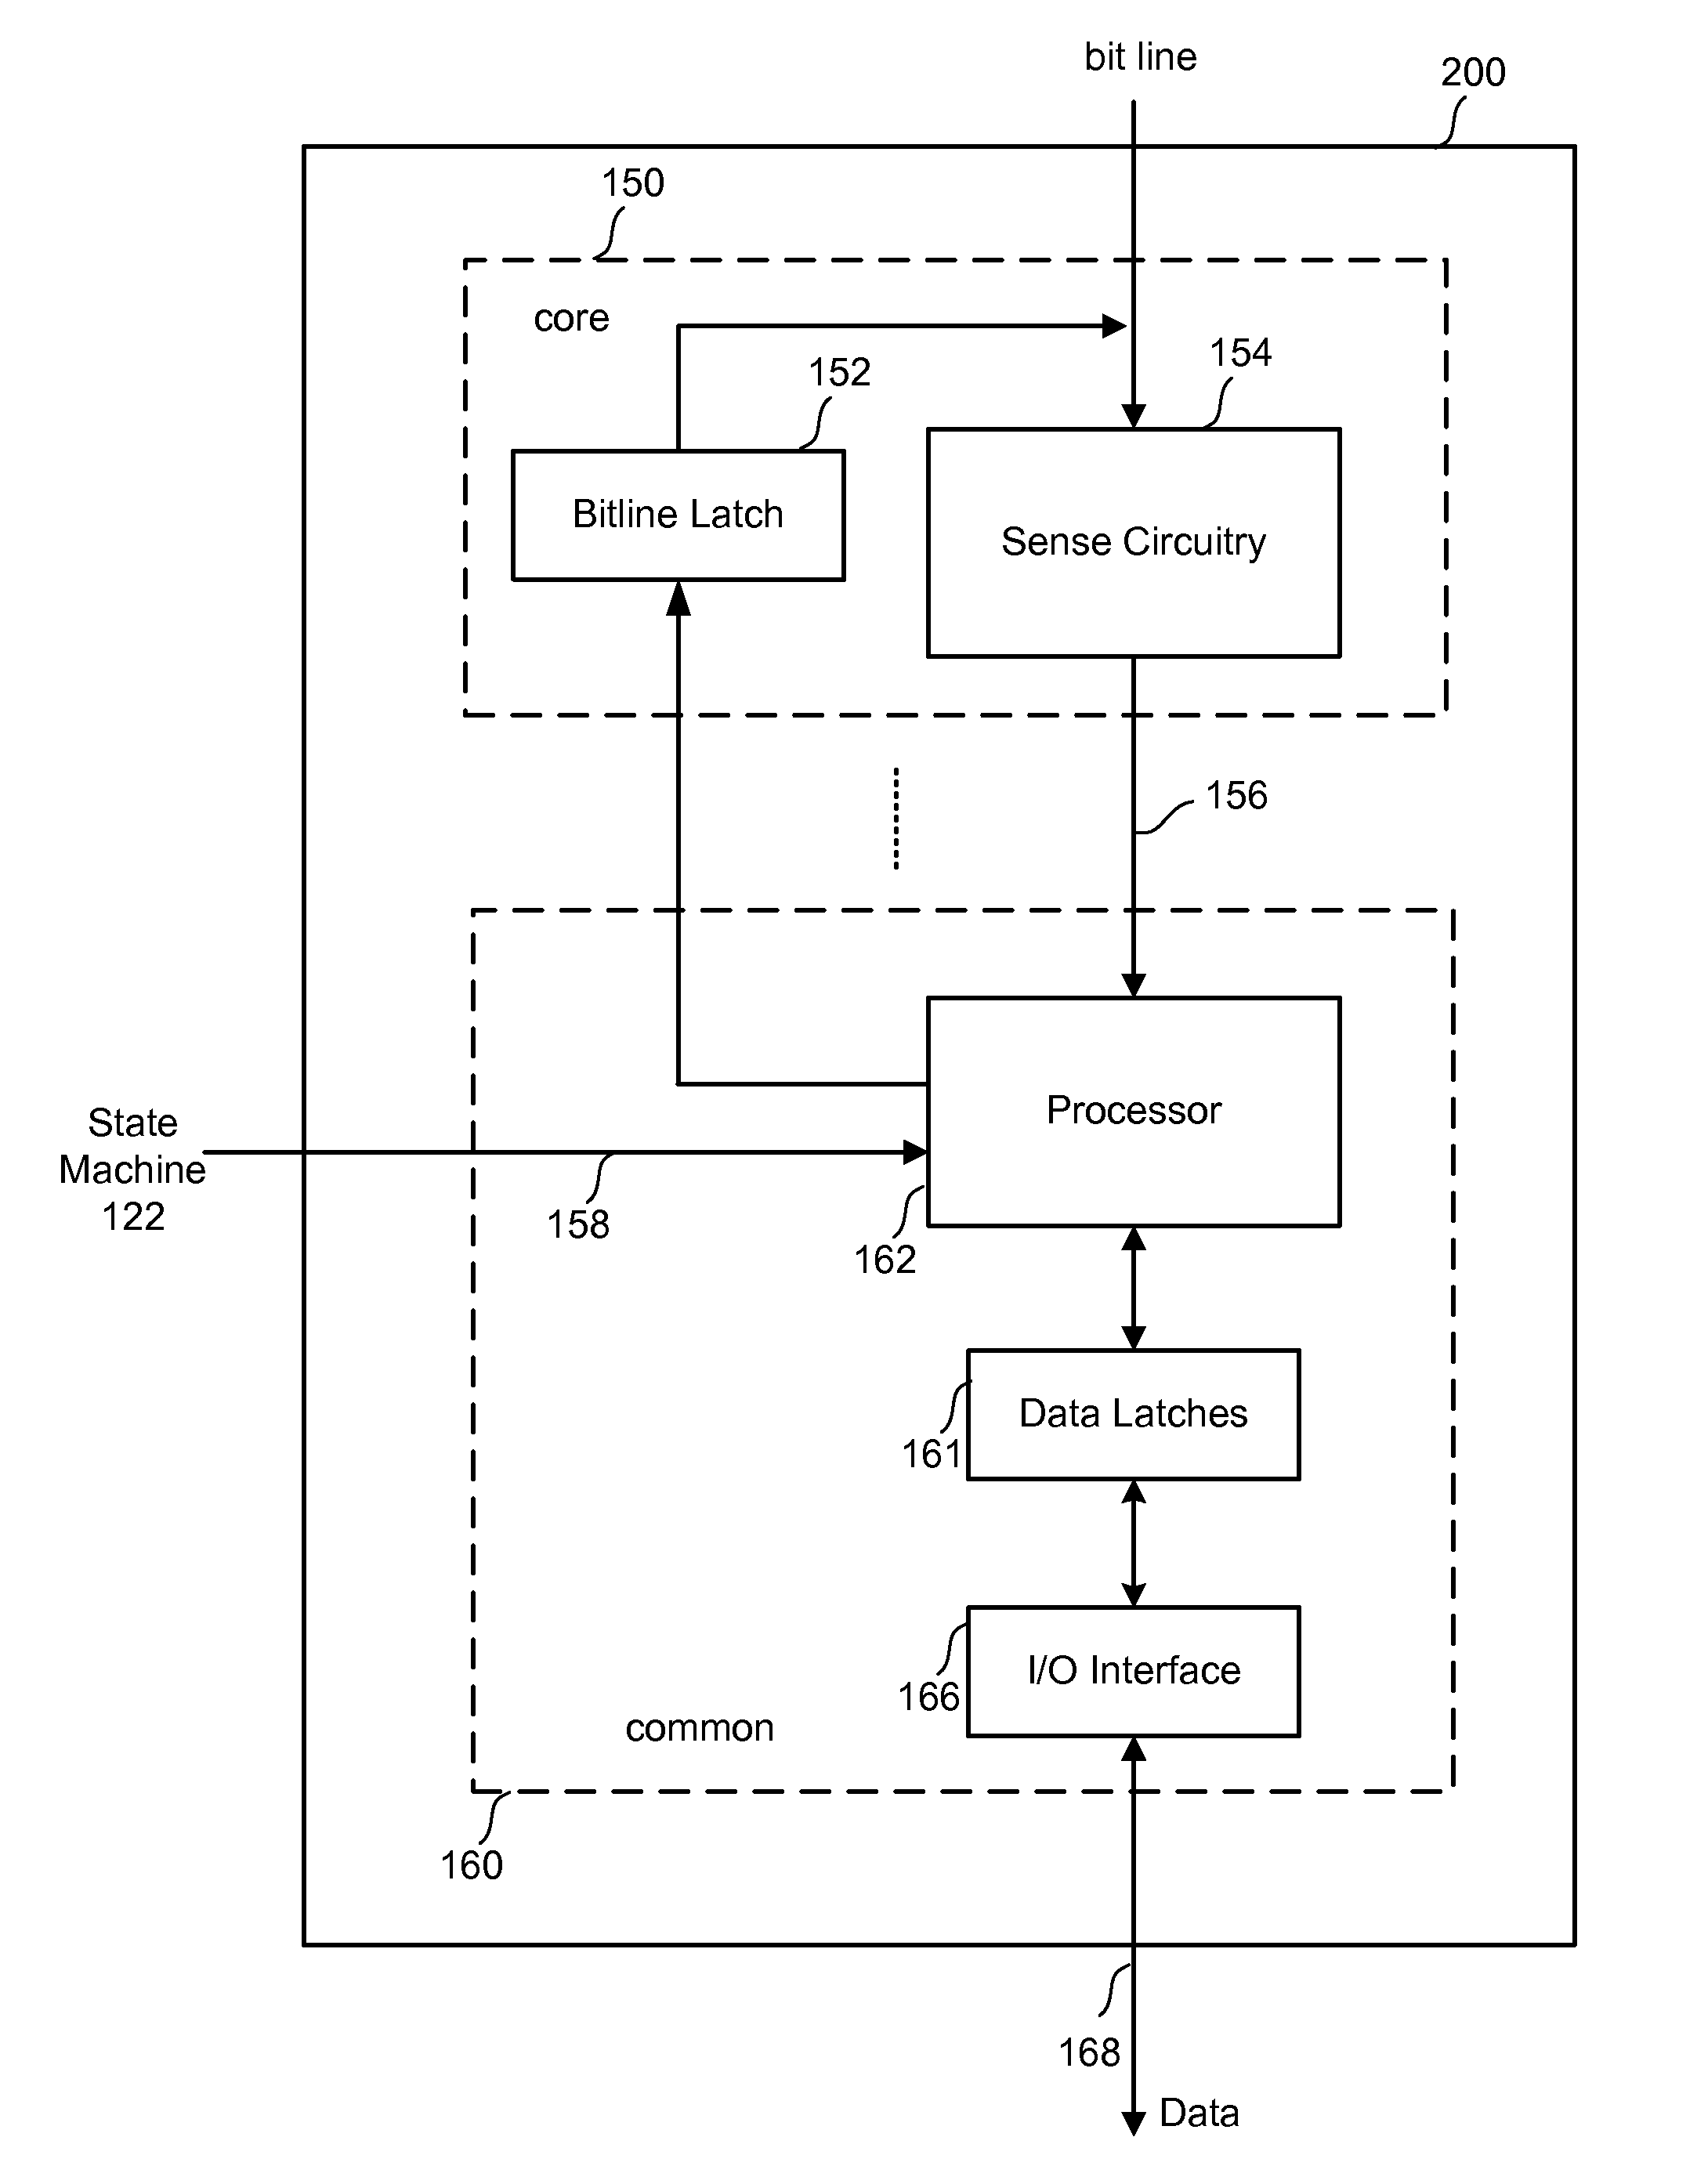 Systems for margined neighbor reading for non-volatile memory read operations including coupling compensation